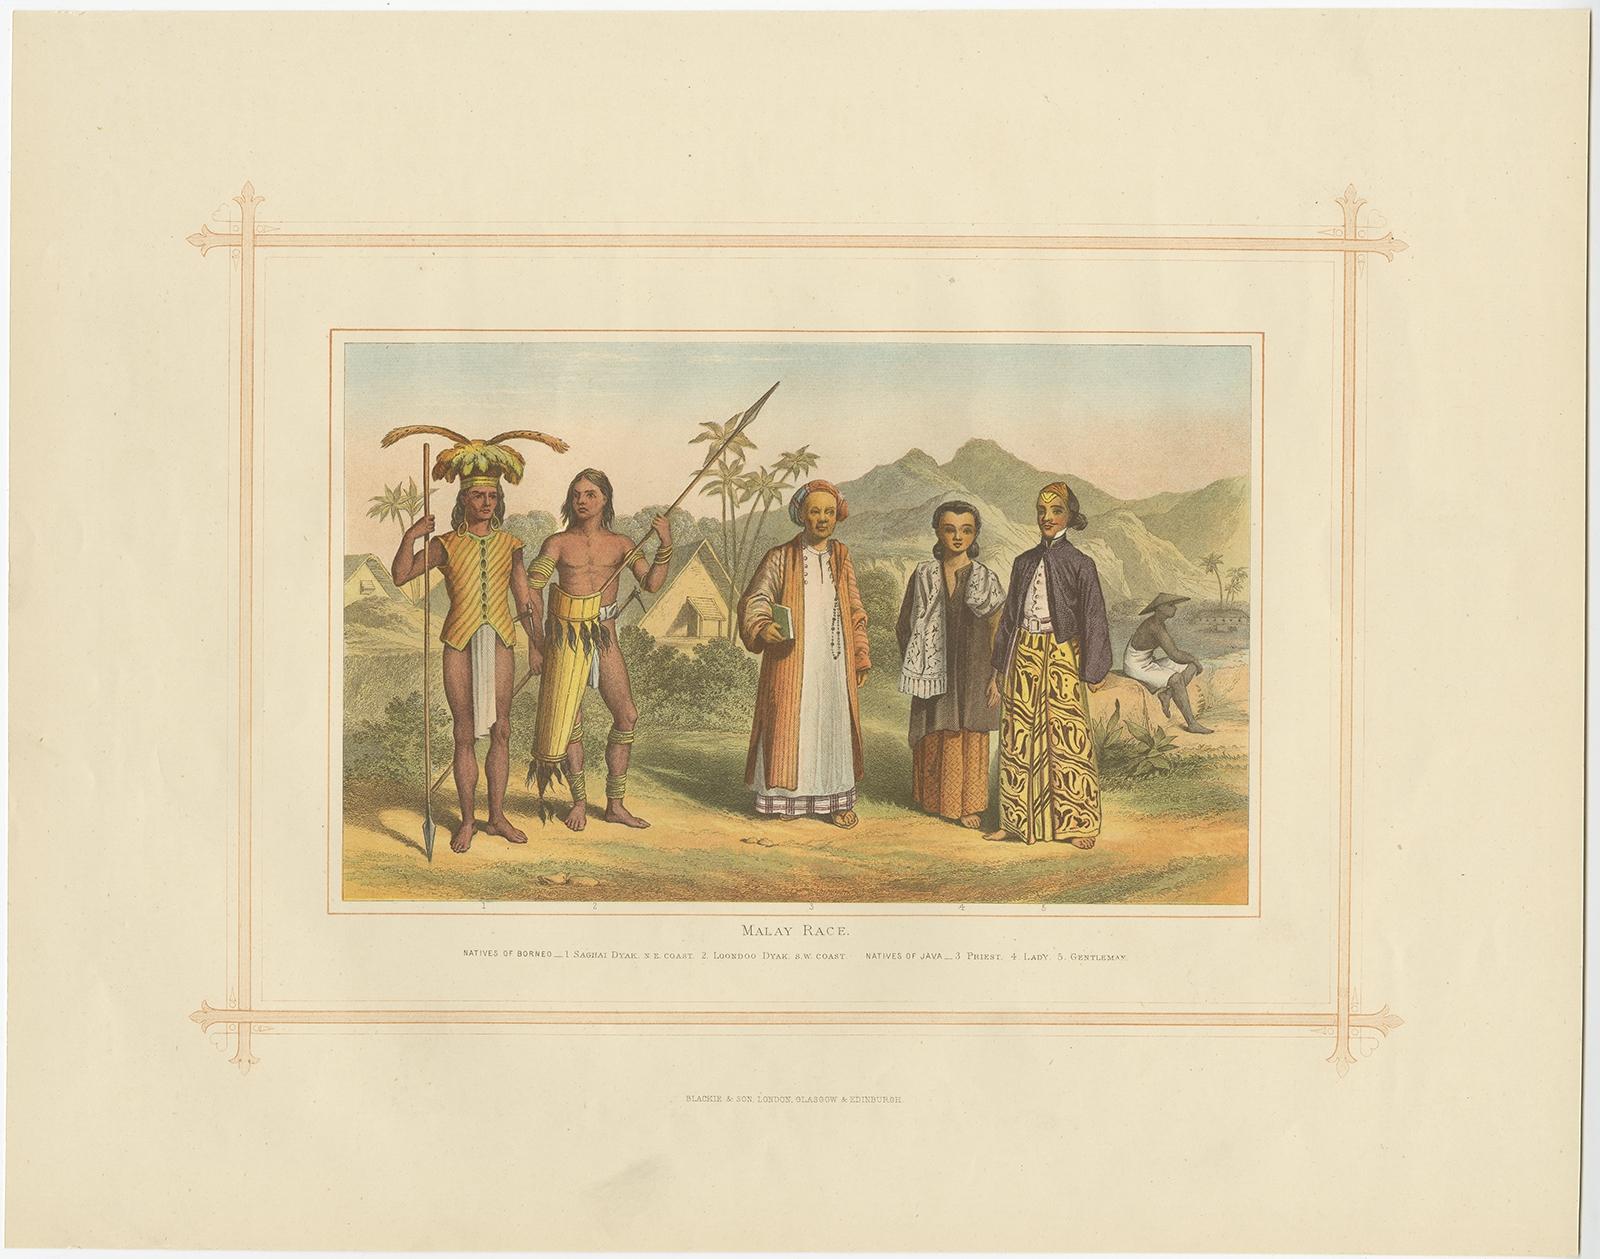 Antique print titled 'Malay Race'. Depicts 1. Saghai Dyak N.E. Coast. 2. Loondoo Dyak. S.W. Coast. Natives of Java- 3. Priest. 4. Lady. 5. Gentleman. 

Antique chromolithograph depicting Malays. This print originates from 'The Comprehensive Atlas